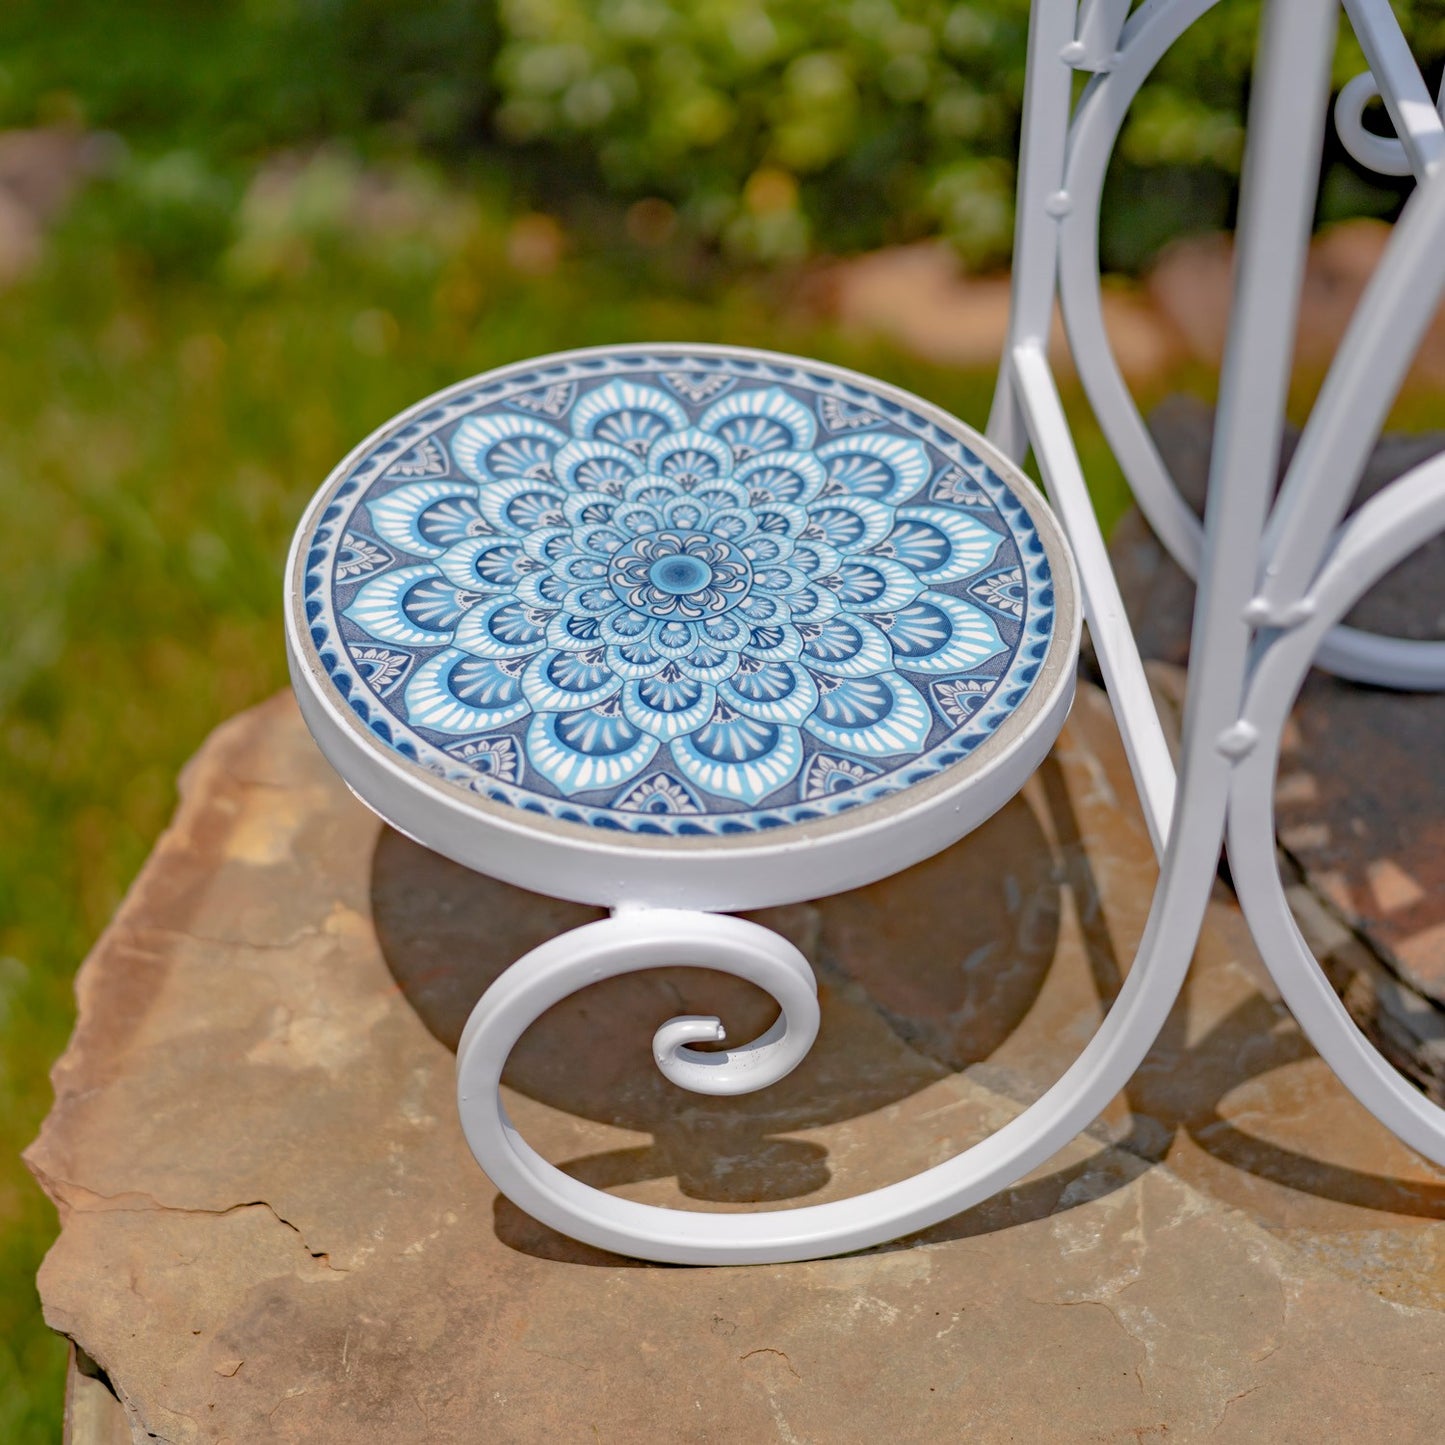 Seattle Three-Tier Mosaic Plant Stand